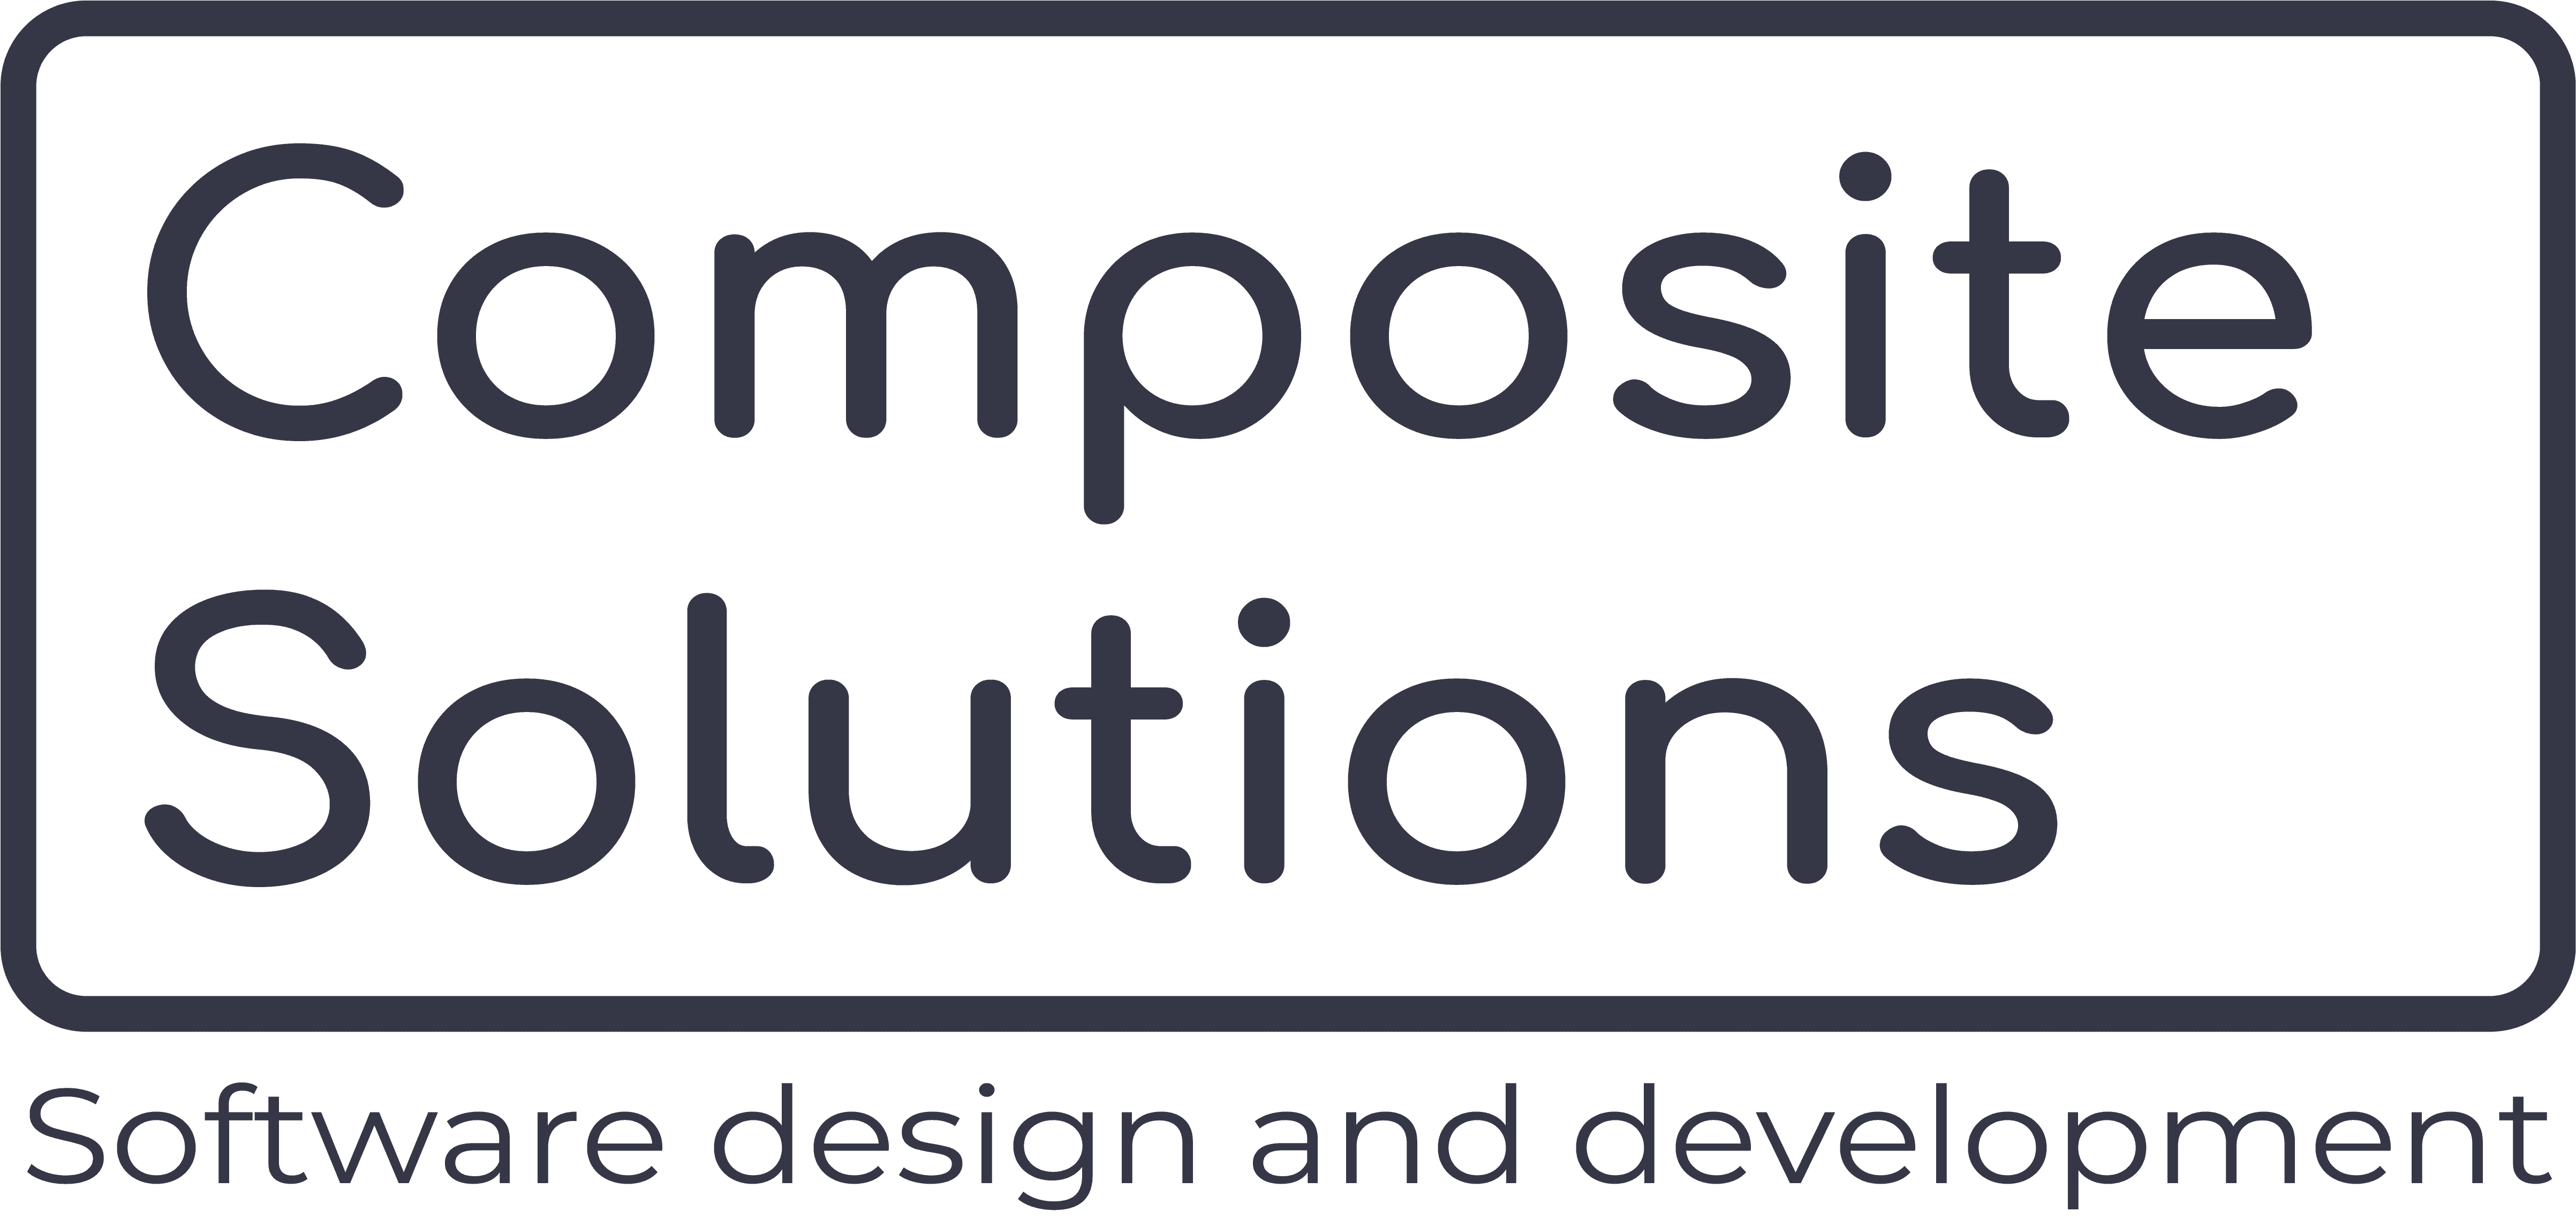 Composite Solutions